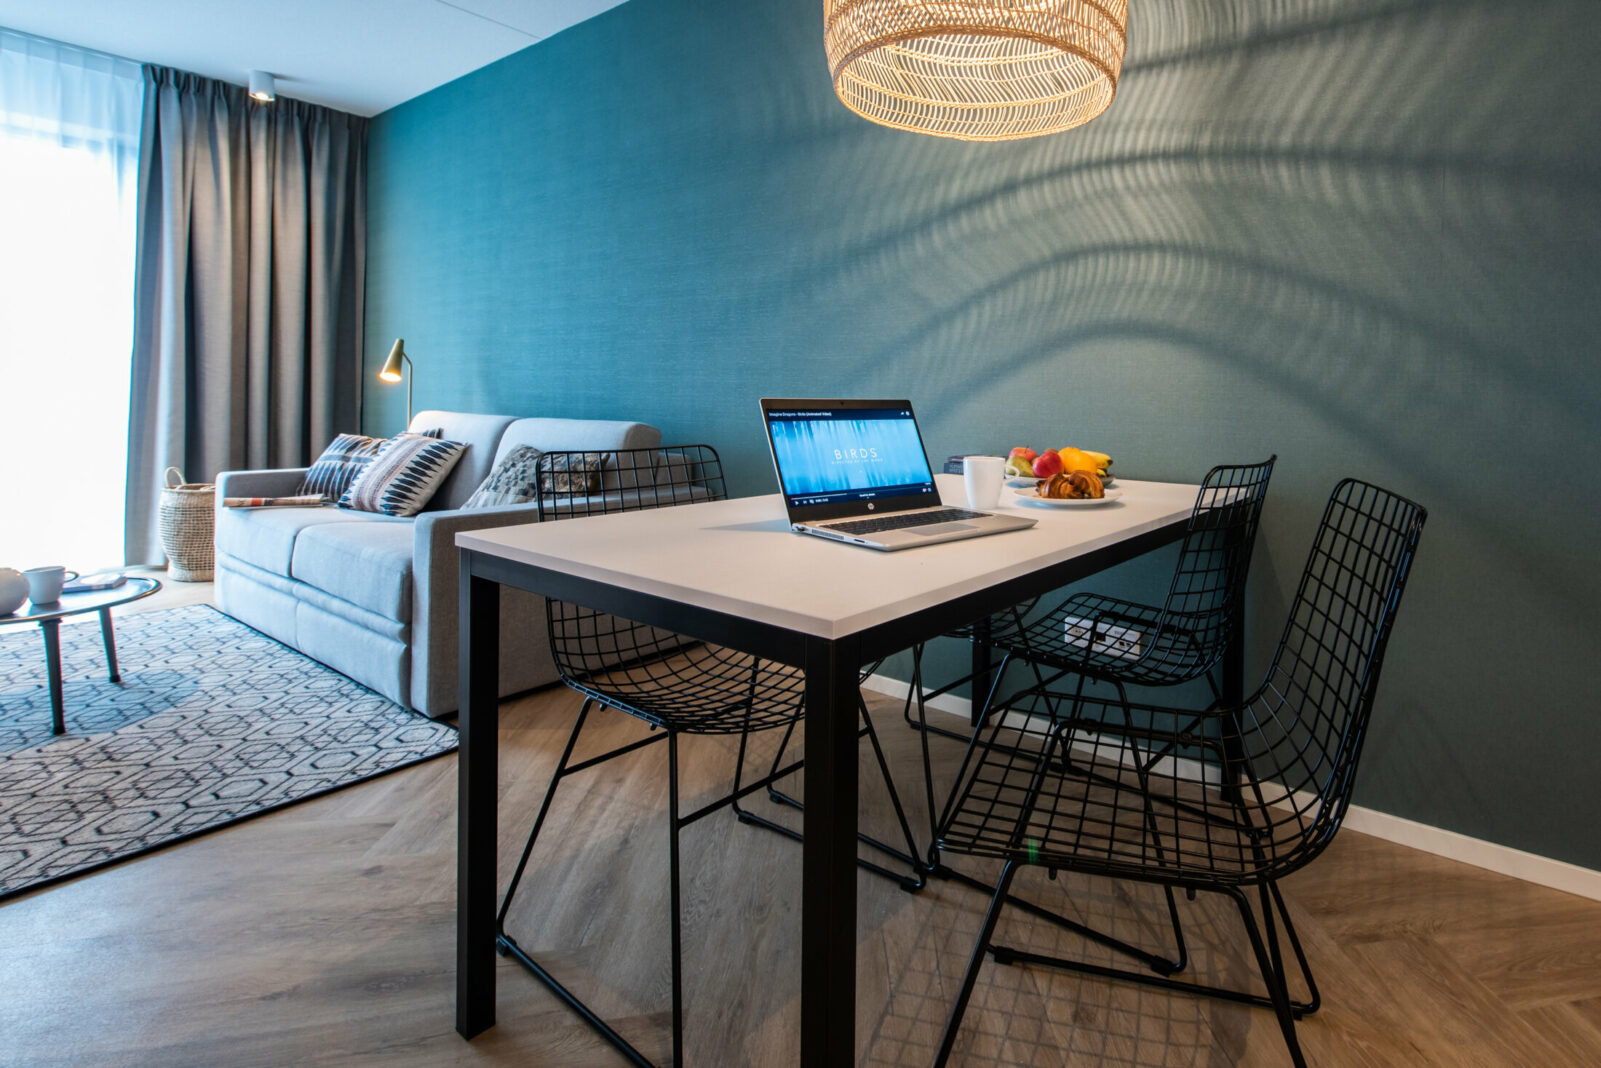 One-bedroom Essential Breeze - Yays Entrepothaven Amsterdam apartments - dining table